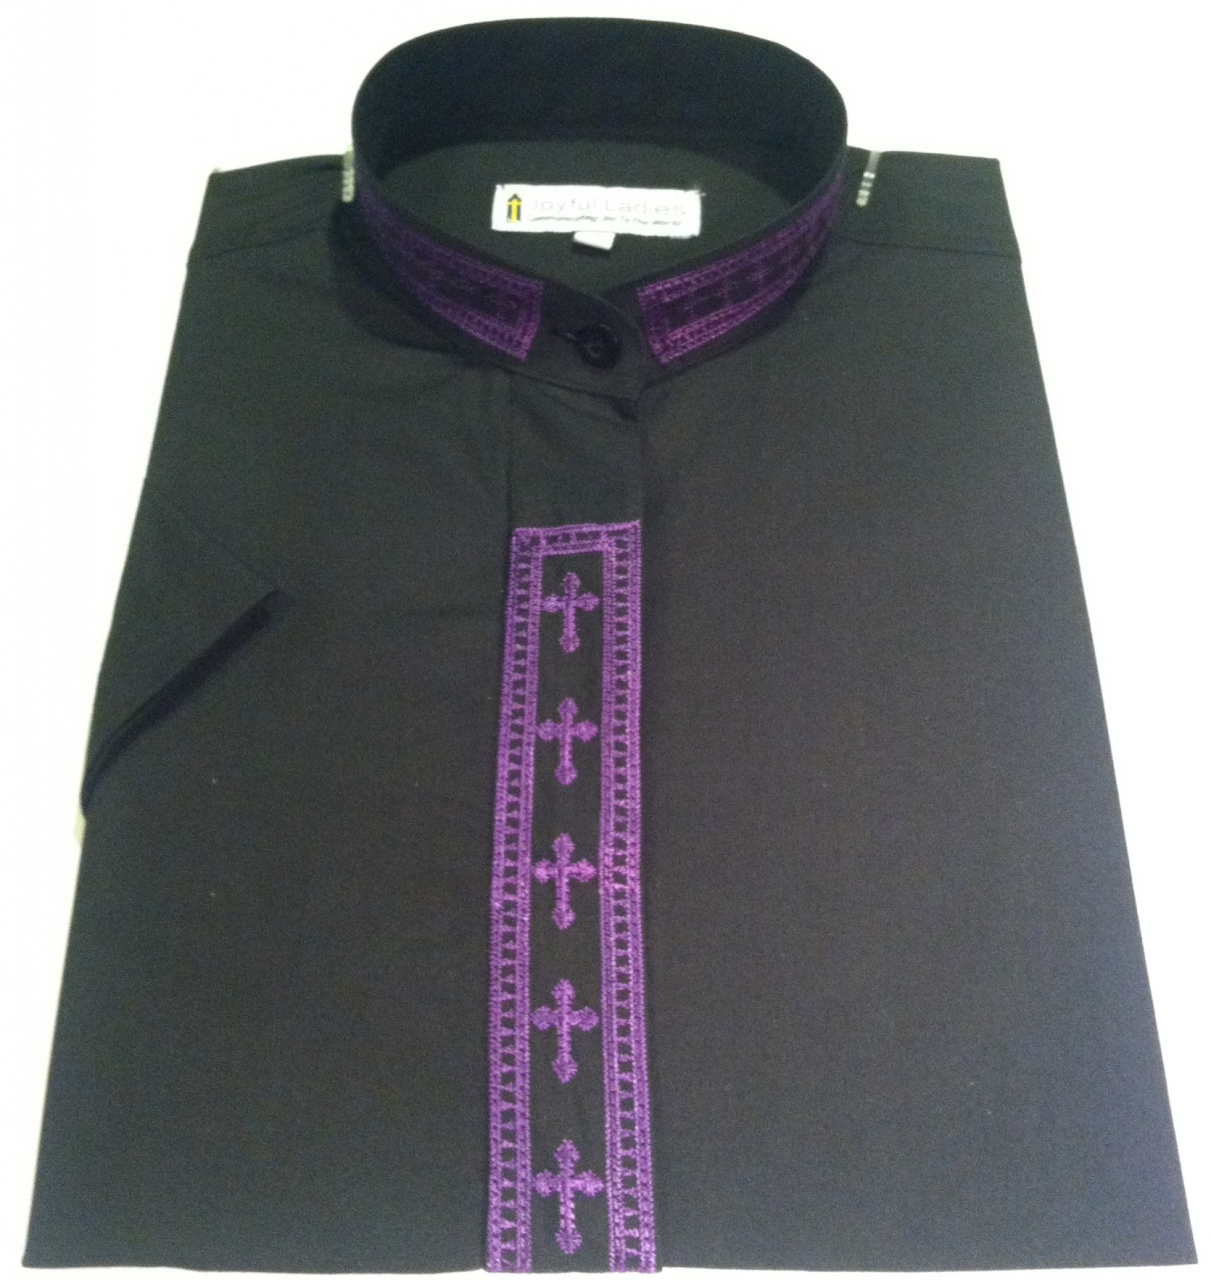 359. Men's Short-Sleeve Clergy Shirt With Fine Embroidery - Black/Purple